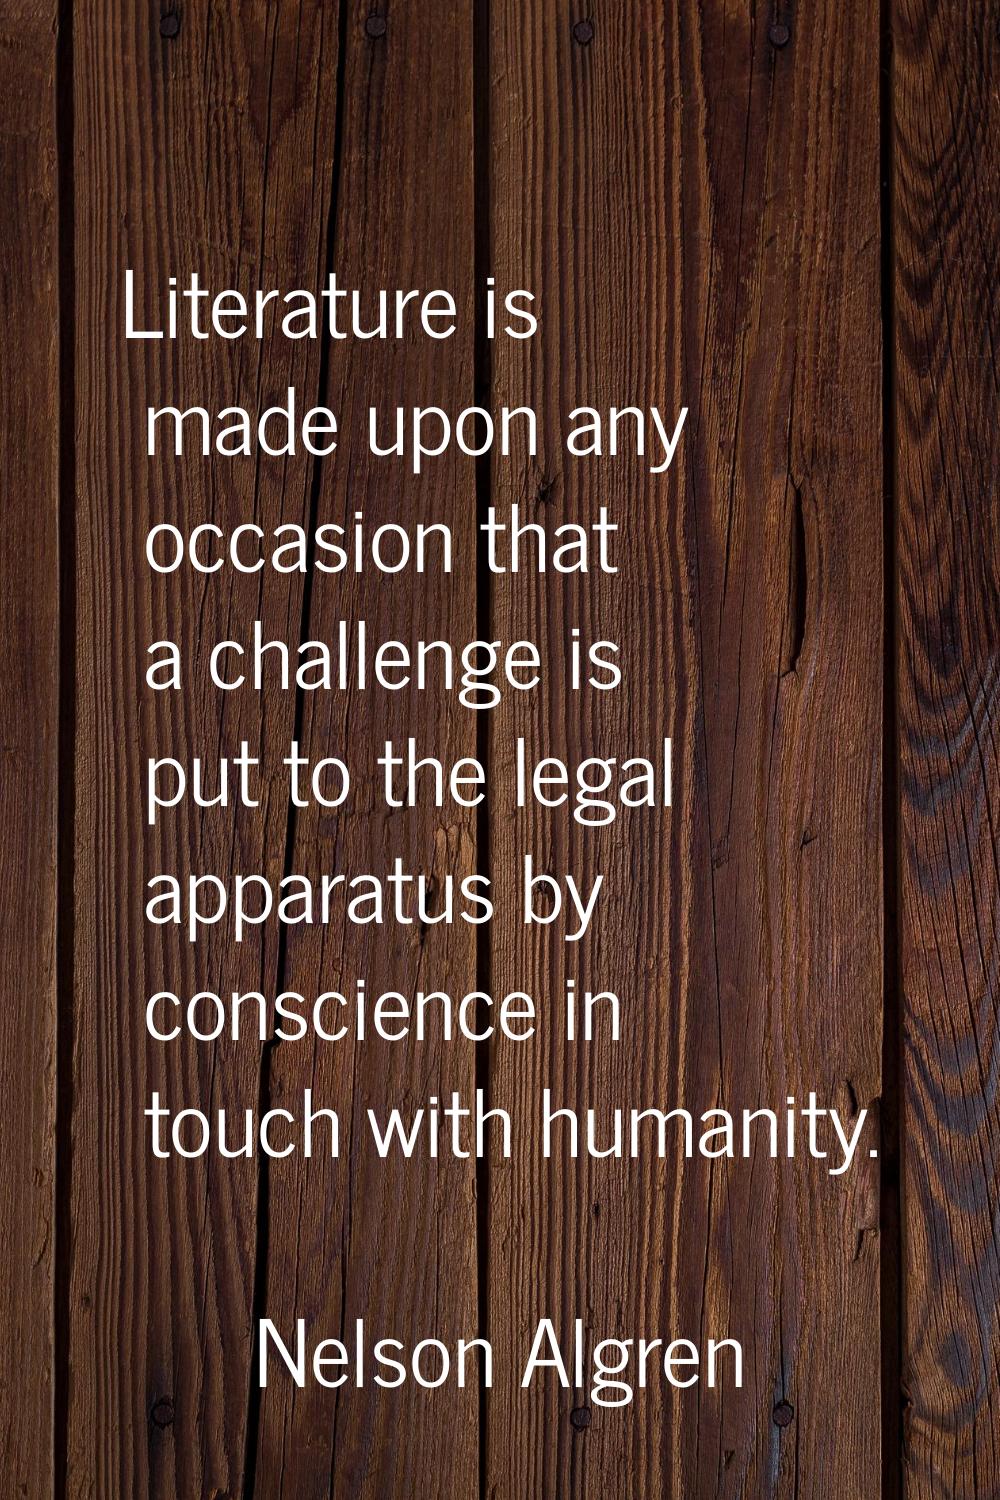 Literature is made upon any occasion that a challenge is put to the legal apparatus by conscience i